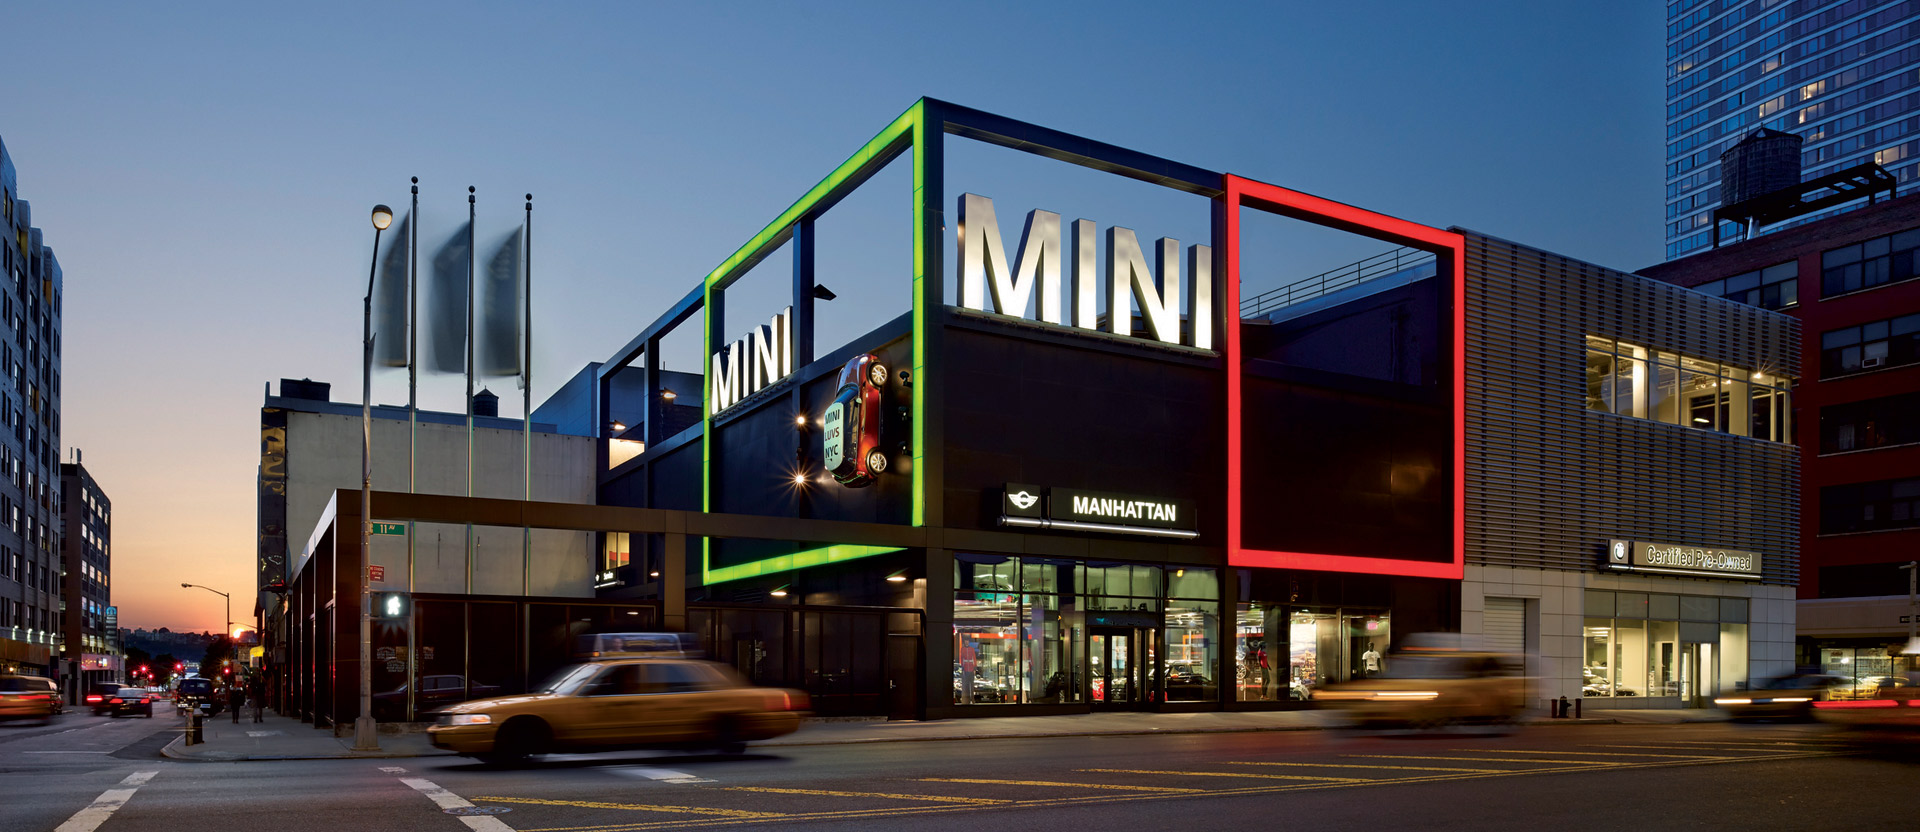 Exterior of a modern car showroom at twilight, featuring vibrant neon-lit framing in green, red, and white, and large glass windows that reveal sleek automobiles and minimalist interior design.